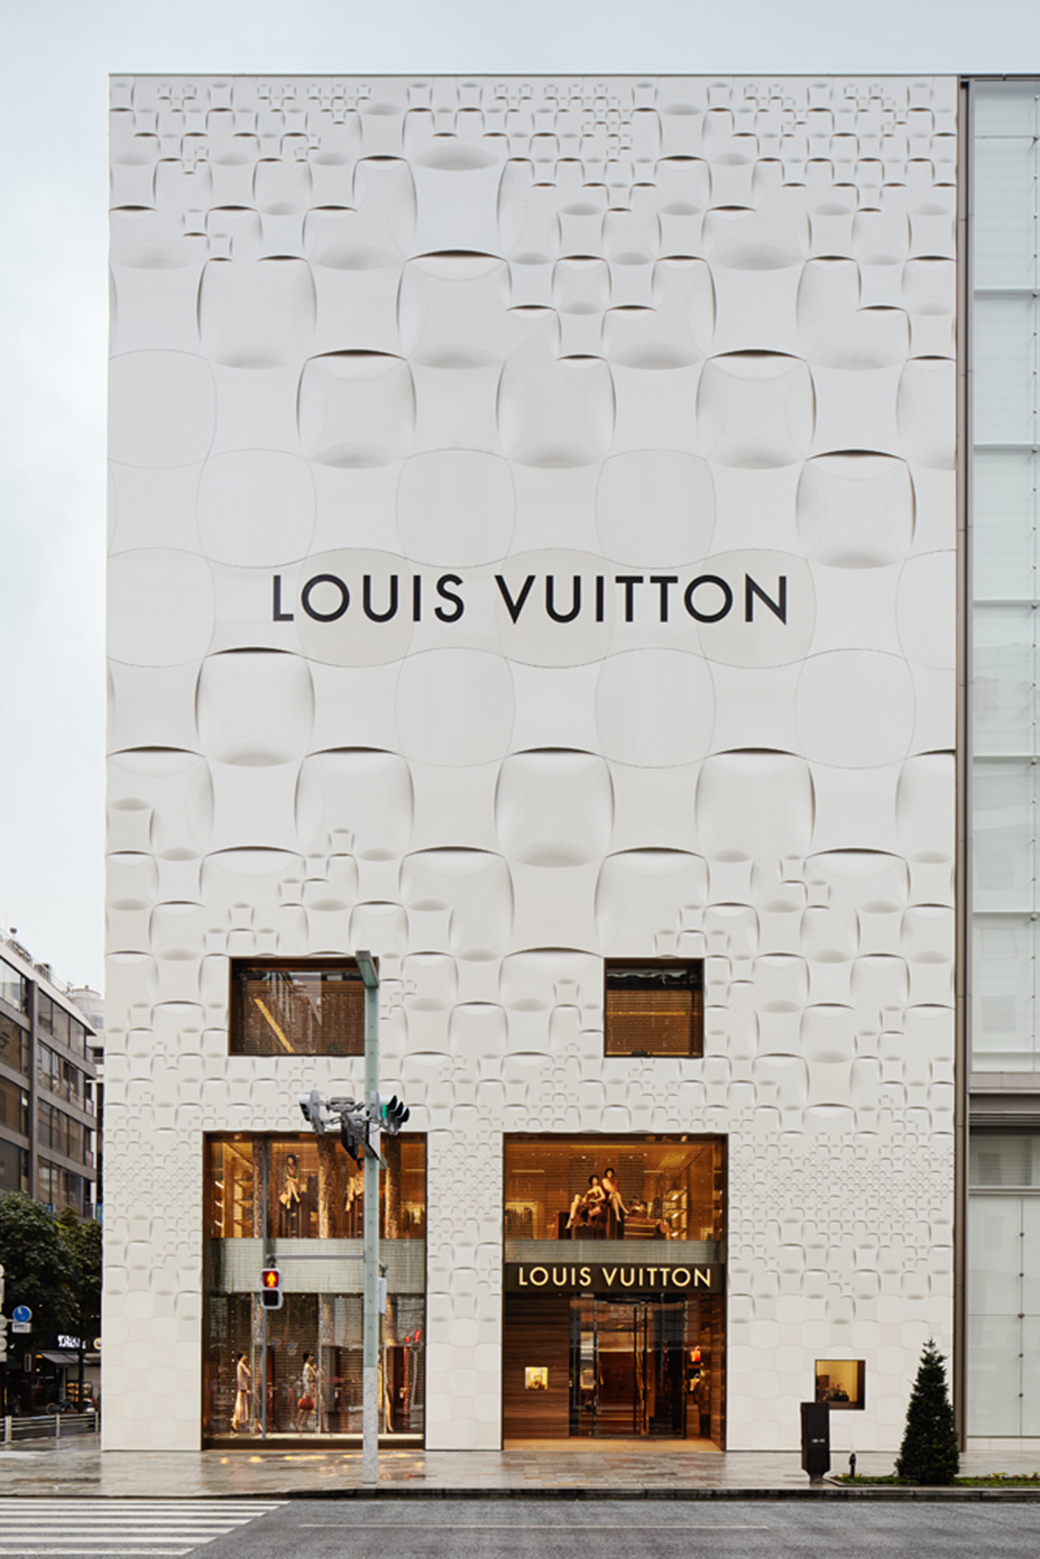 Louis Vuitton Skin: Architecture of Luxury (Tokyo Edition) by Paul